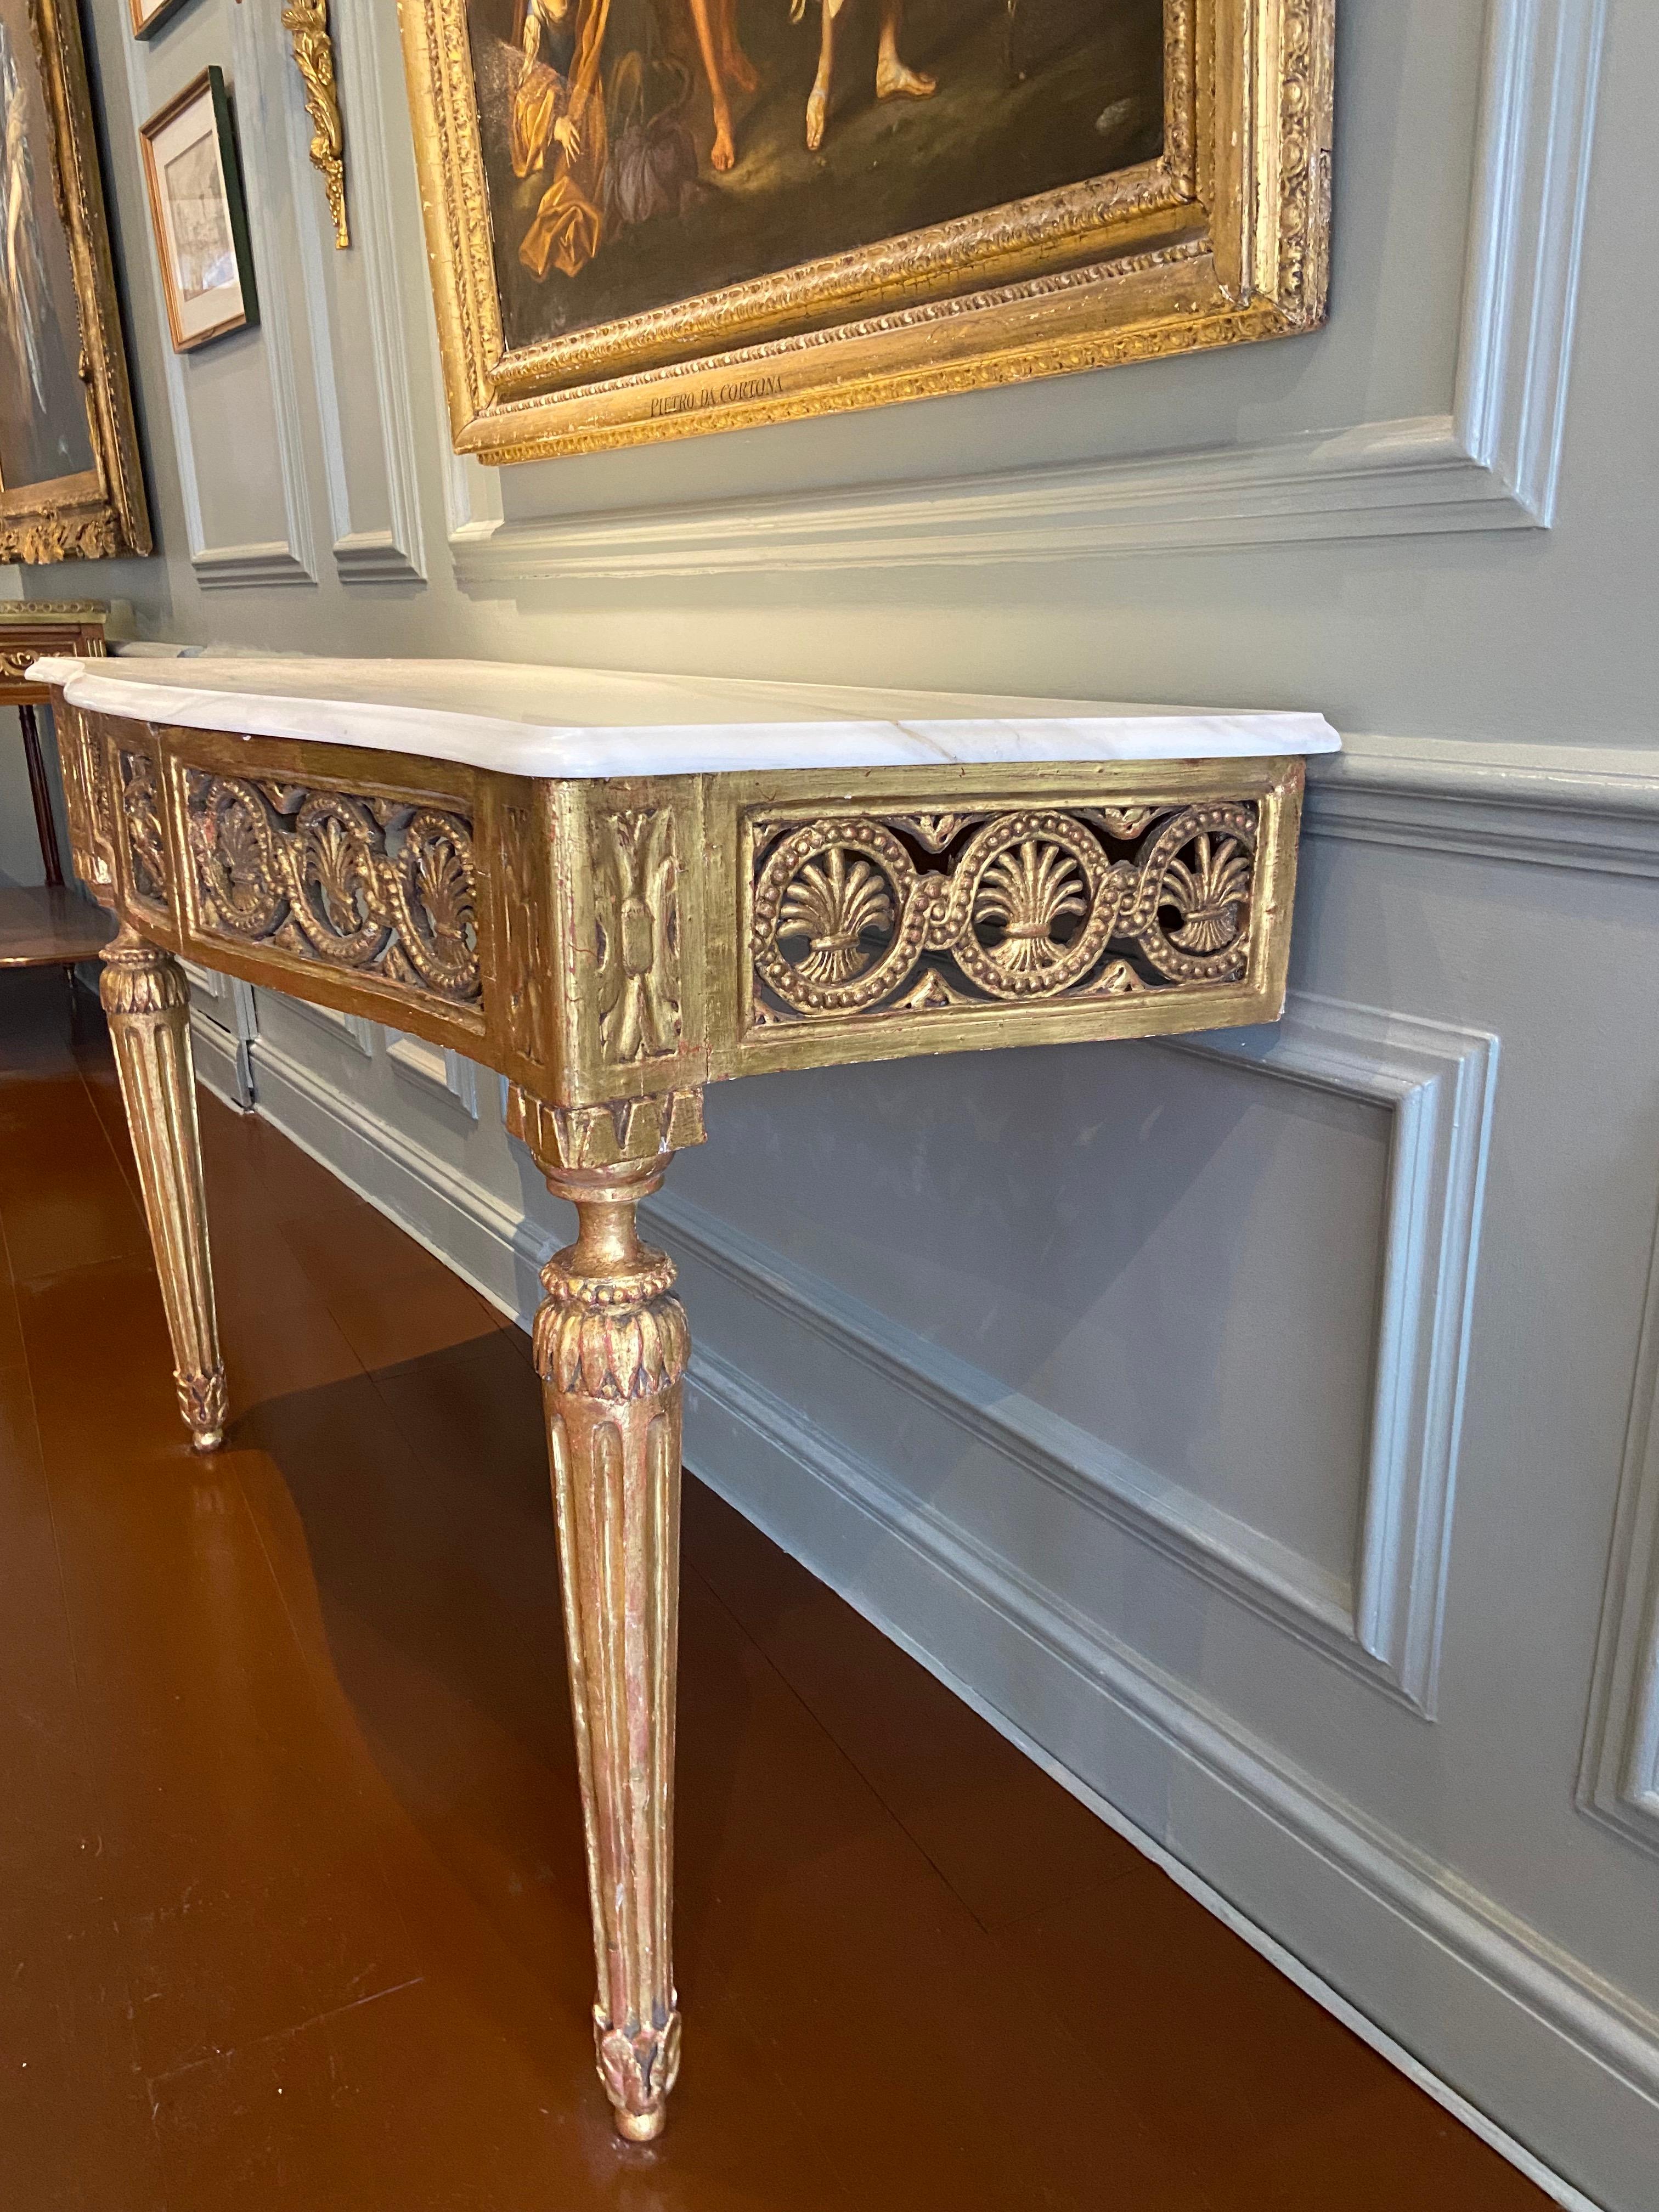 Giltwood Northern Italian Serpentine Carved Gilt-Wood Console Table 'Late 18th Century' For Sale